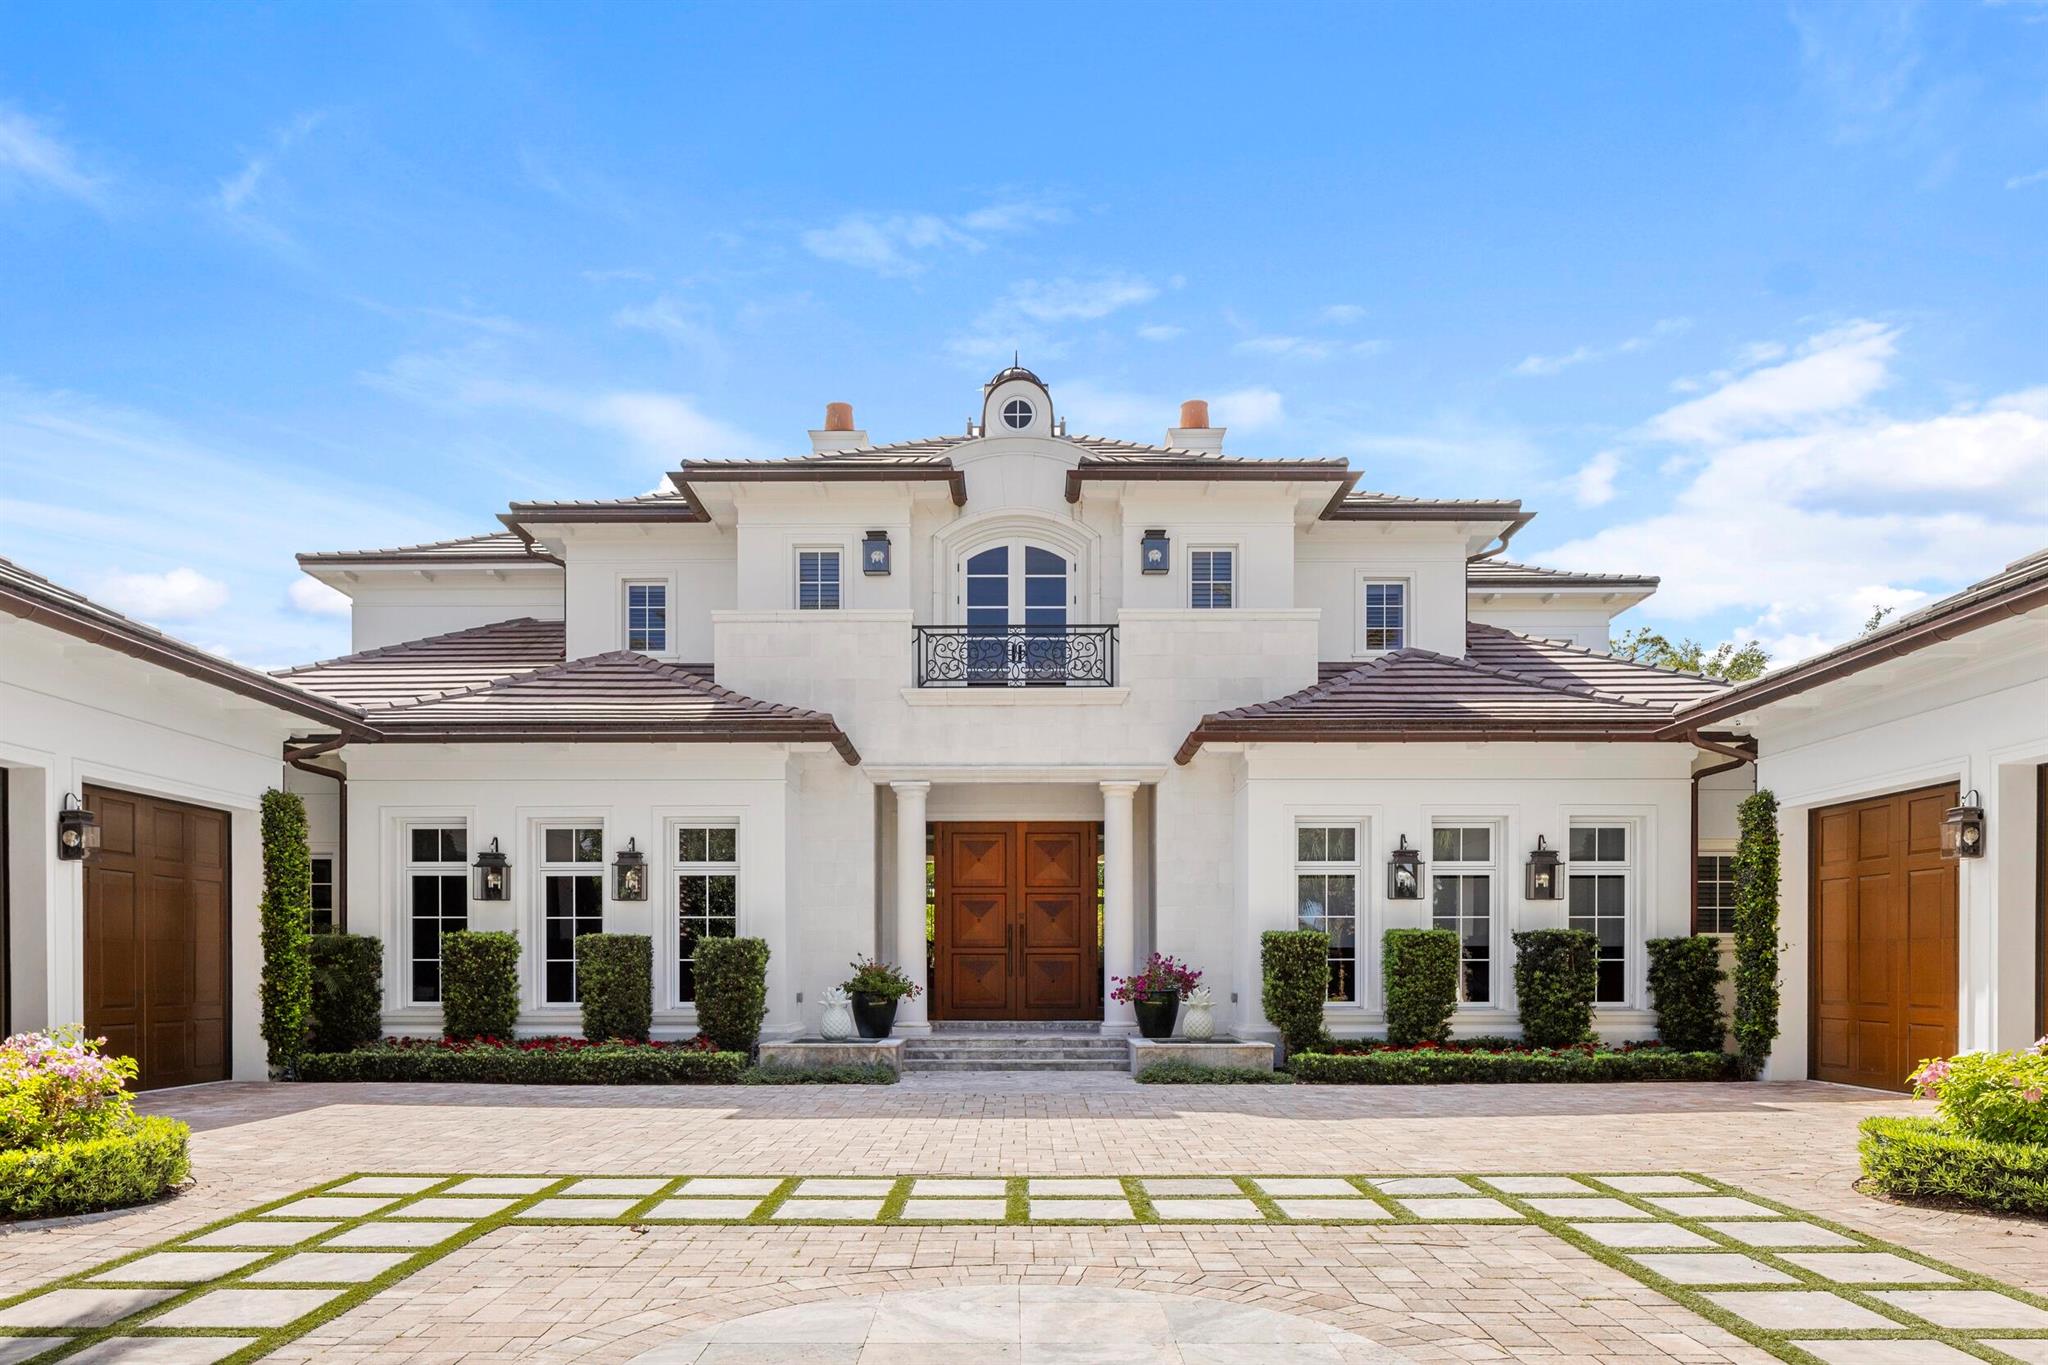 Welcome to 131 W Bears Club Drive, located on nearly 0.6 acres in Jupiter's prestigious golf community. This stunning estate, designed by Randall Stofft and built by Onshore Construction in 2018, boasts over 12,000 total square feet, 7 bedrooms, 8 full bathrooms, and two half bathrooms. Step outside to enjoy the lush landscaping that creates a tranquil outdoor space perfect for entertaining, complete with ample seating, a summer kitchen, large pool, spa, pergola, and a fireplace. The Bear's Club stands as the most expansive golf community in the area, spanning 400 acres with just 100 residences. Renowned for its world-class golf facilities, the club counts multiple PGA and LPGA tour players among its members. Known for its commitment to excellence, The Bear's Club offers the highest